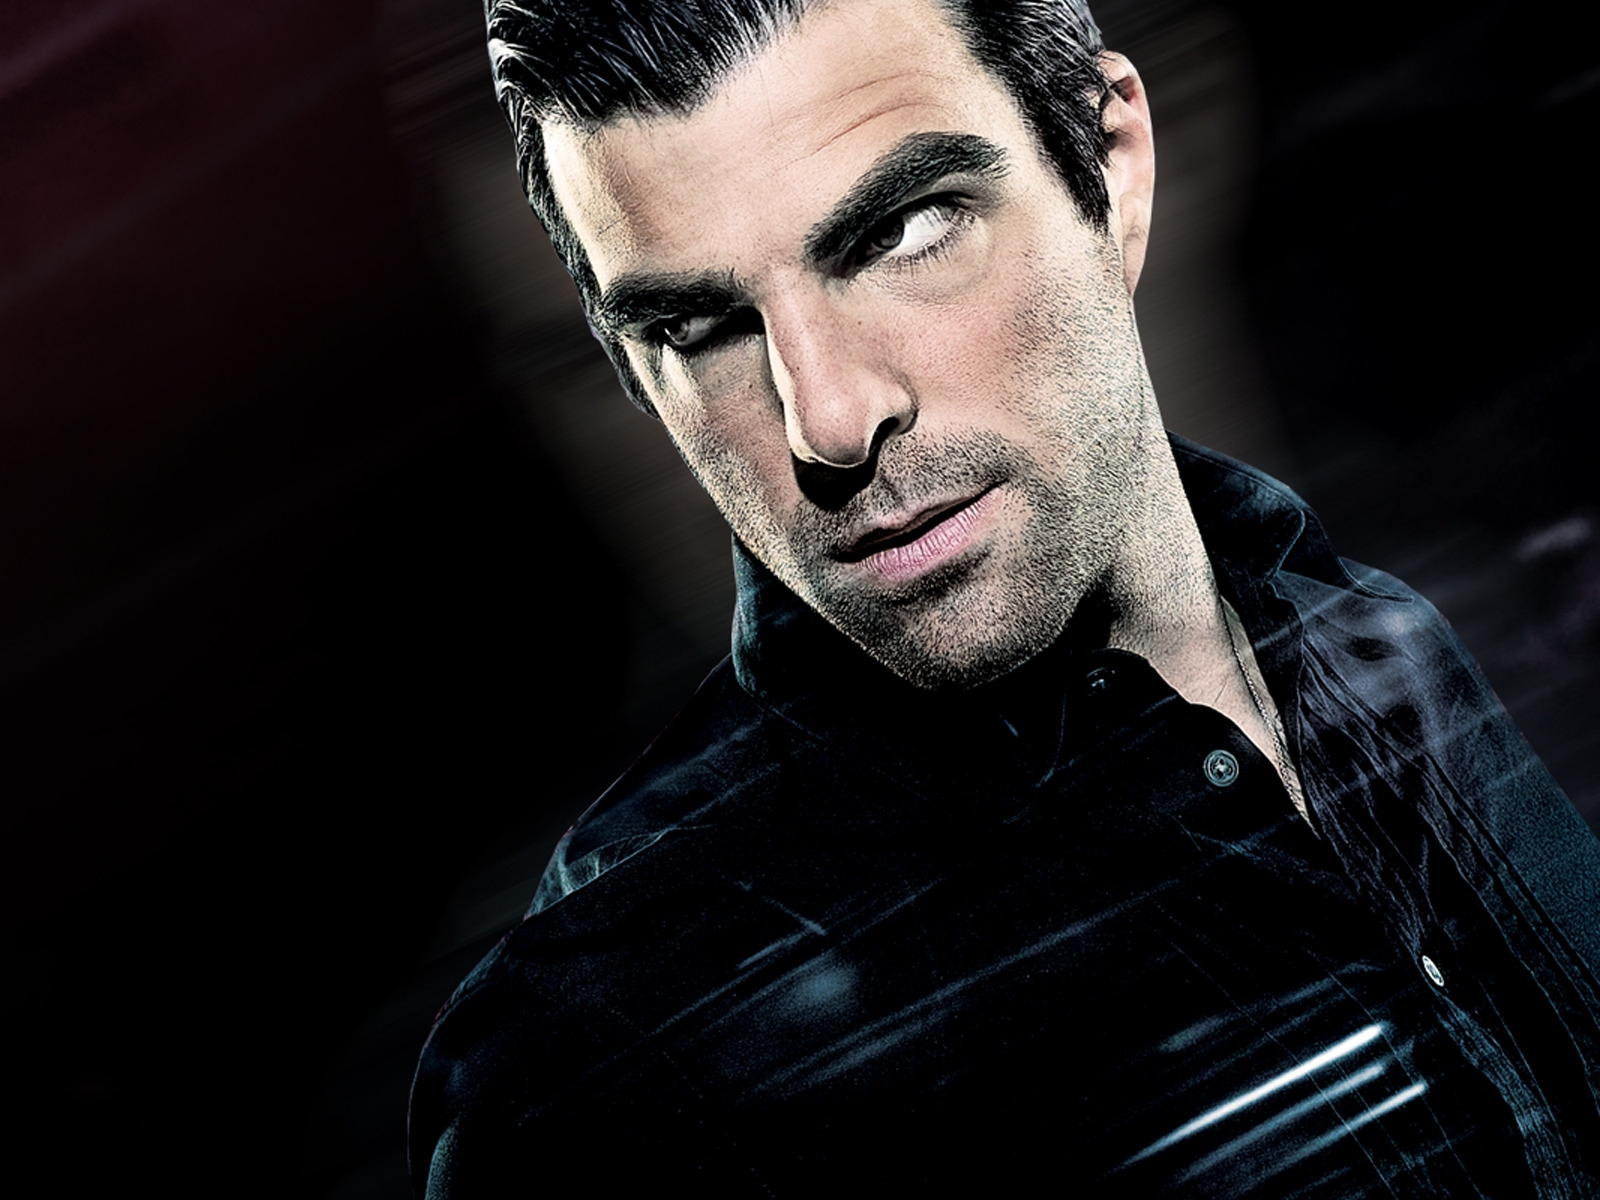 Heroes Sylar for 1600 x 1200 resolution